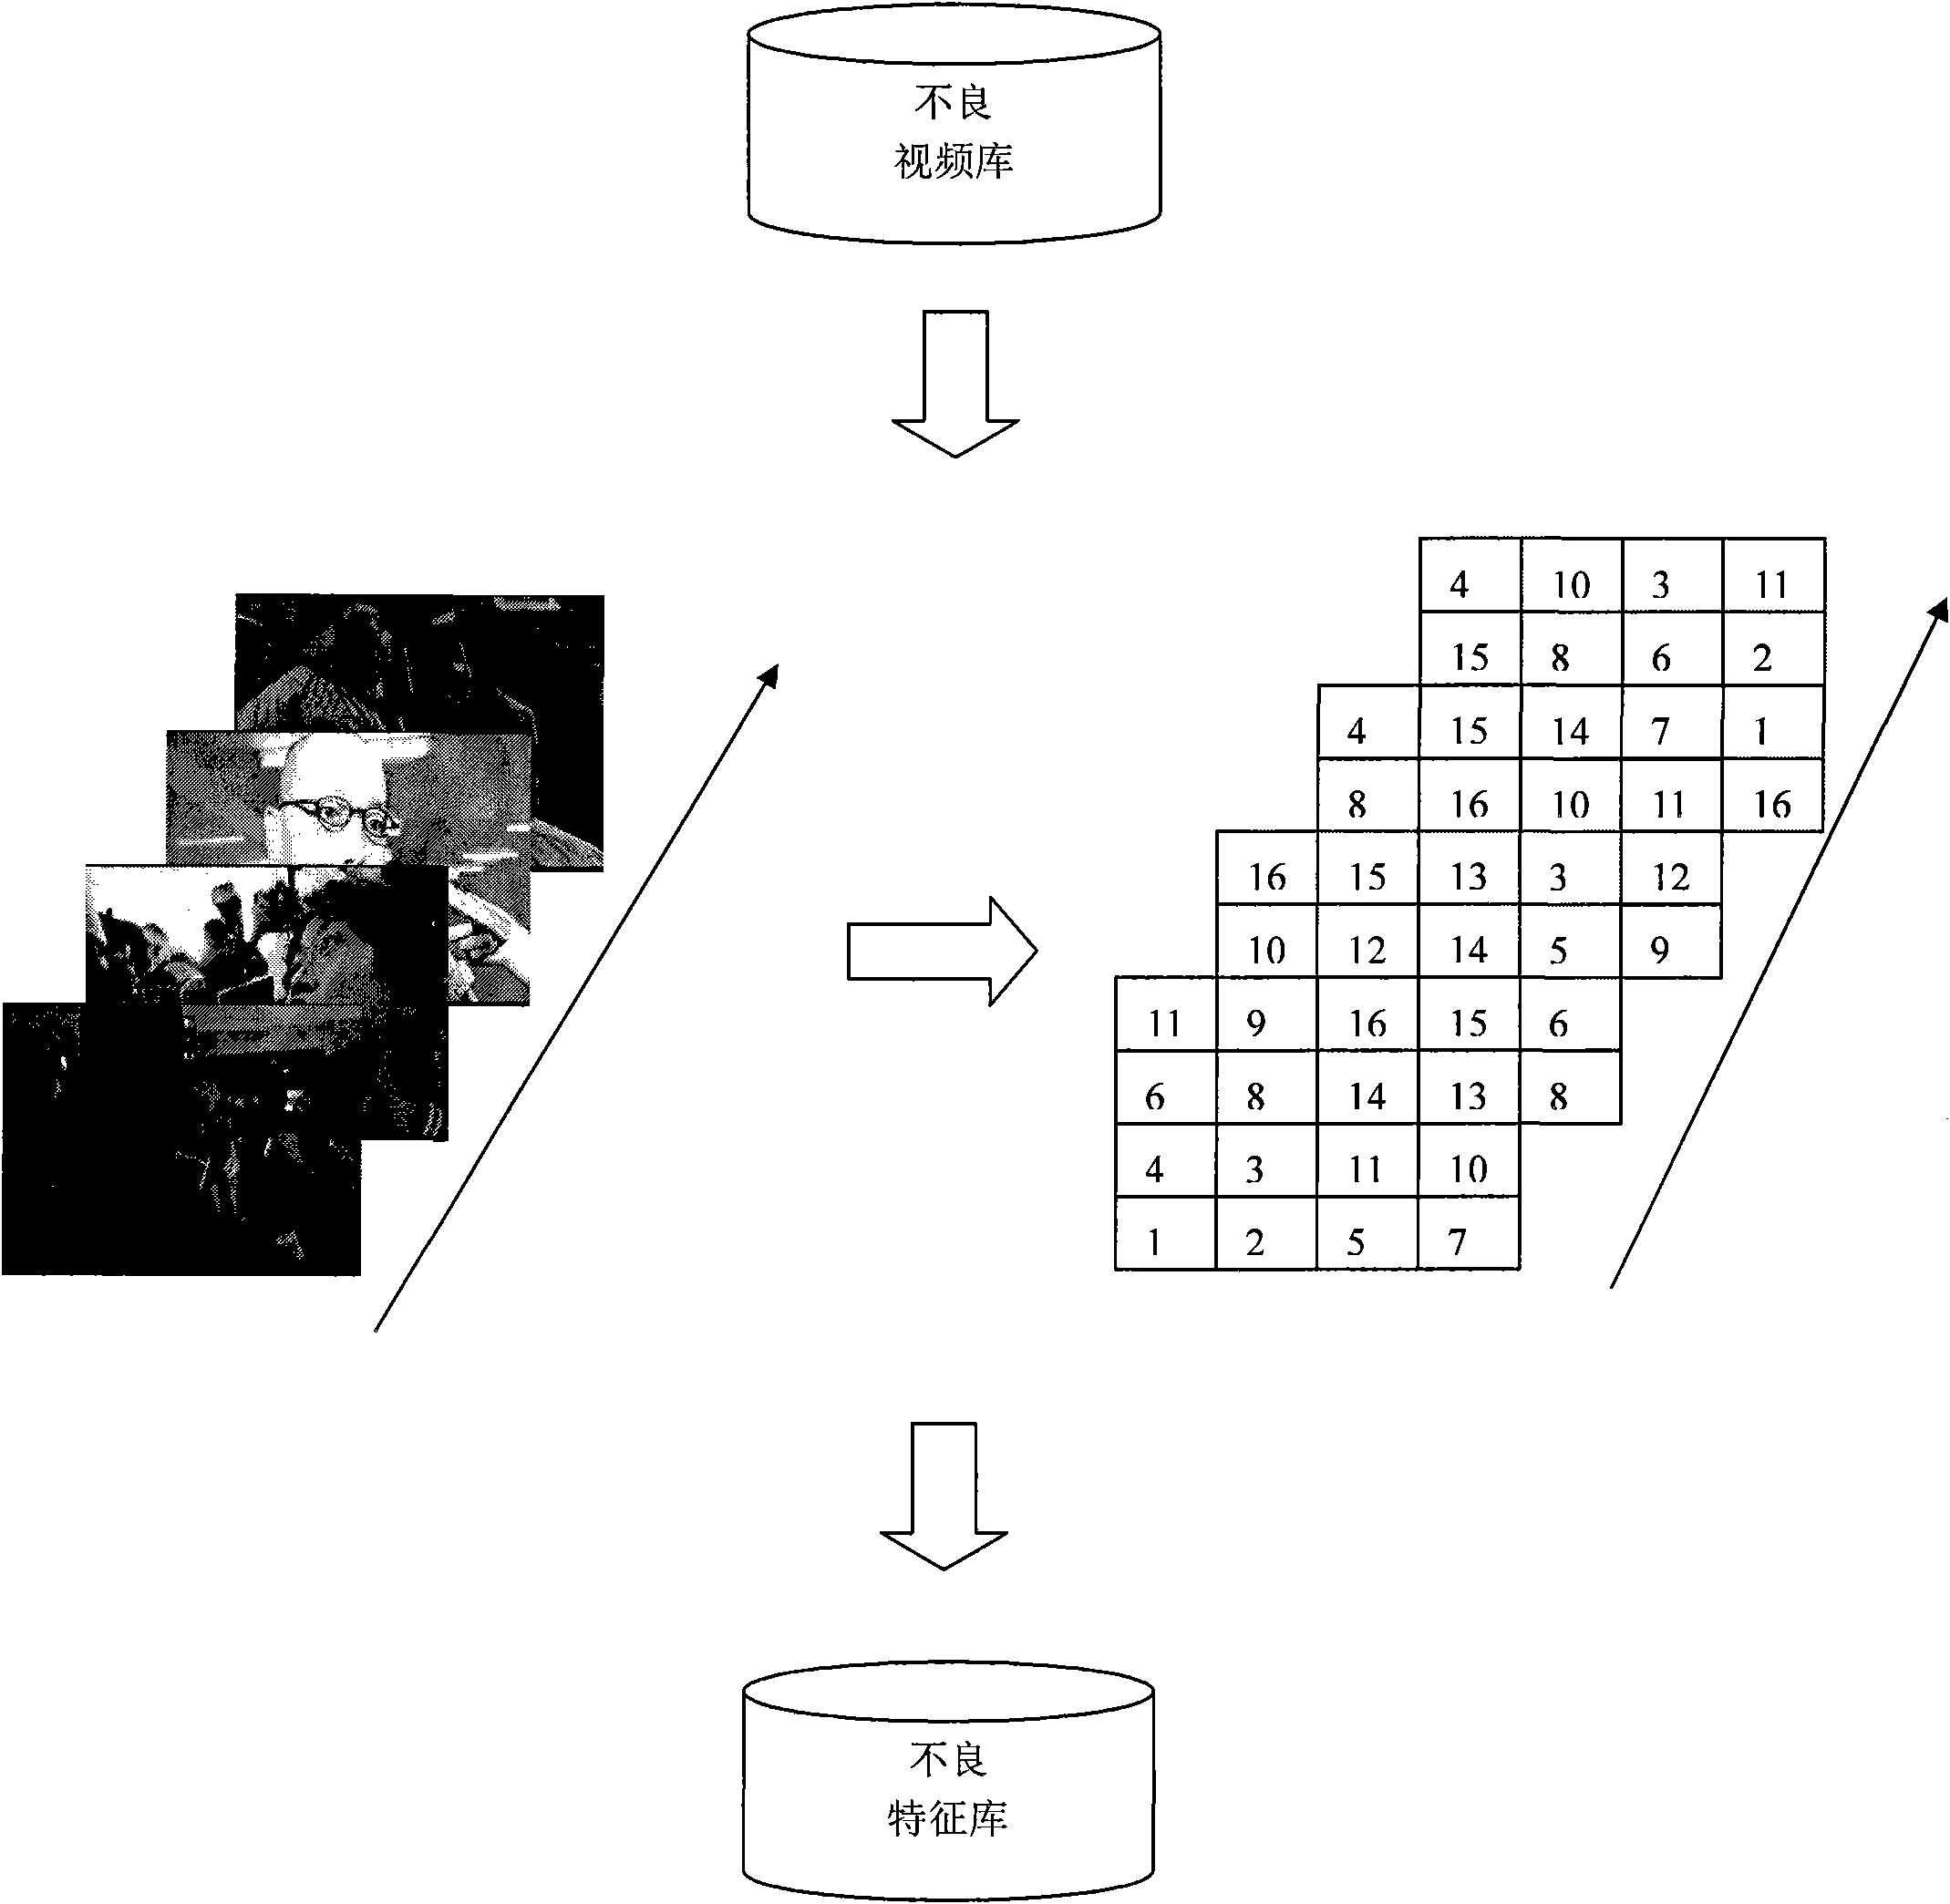 Method for identifying content of digital video